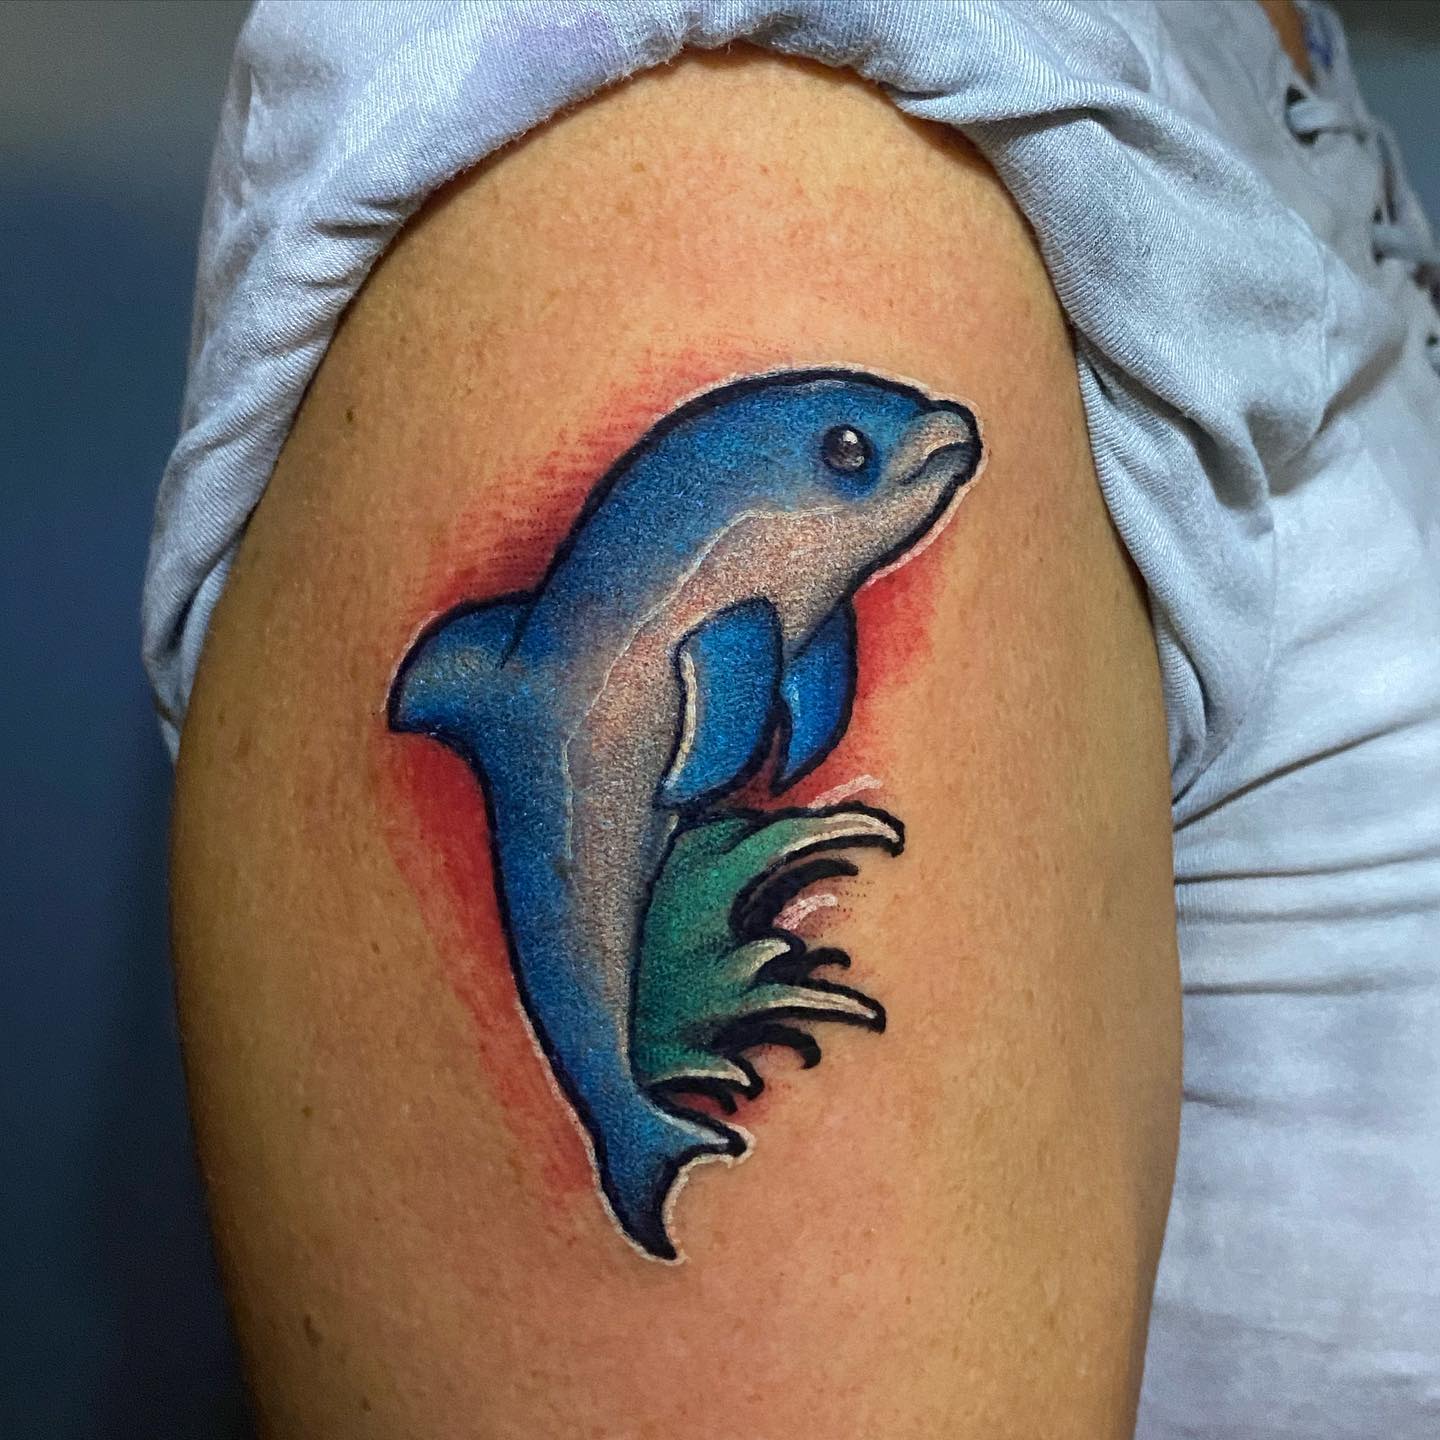 40 Superb Dolphin Tattoo Design Ideas For Women  Page 2 of 3  Bored Art